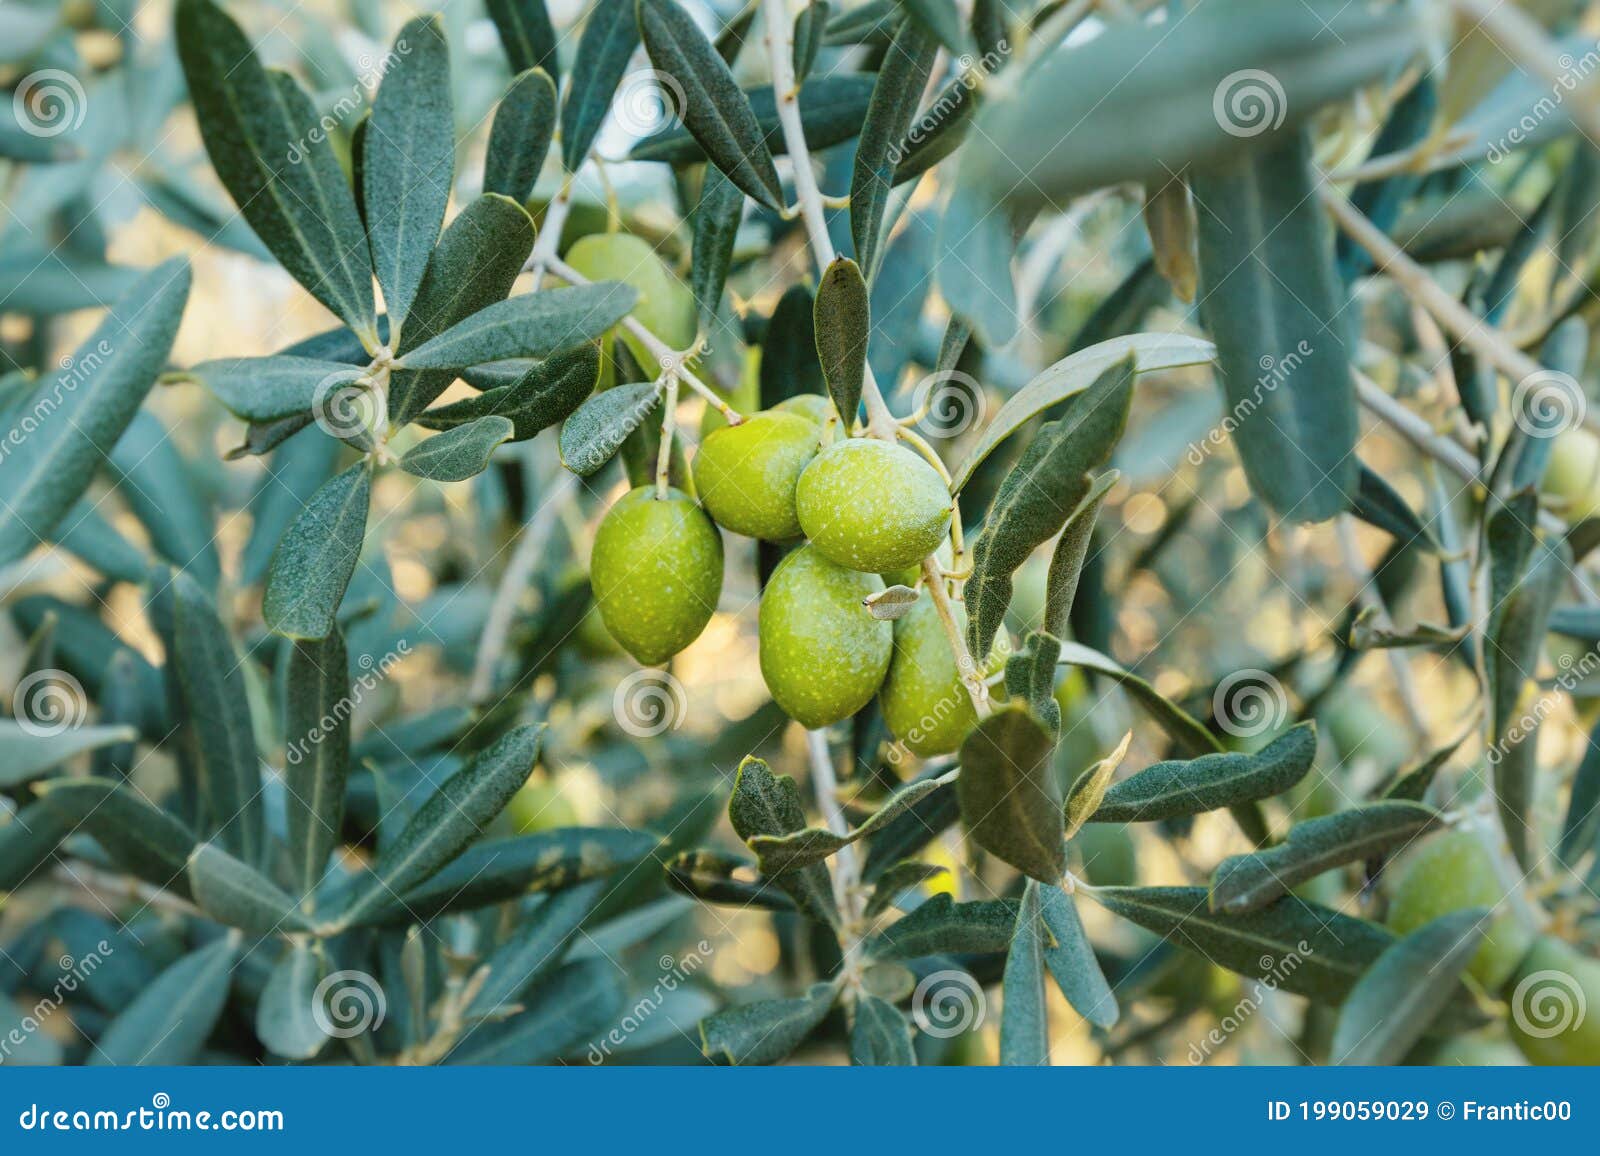 Olives Grow on the Branch of a Young Olive Tree on the Farm